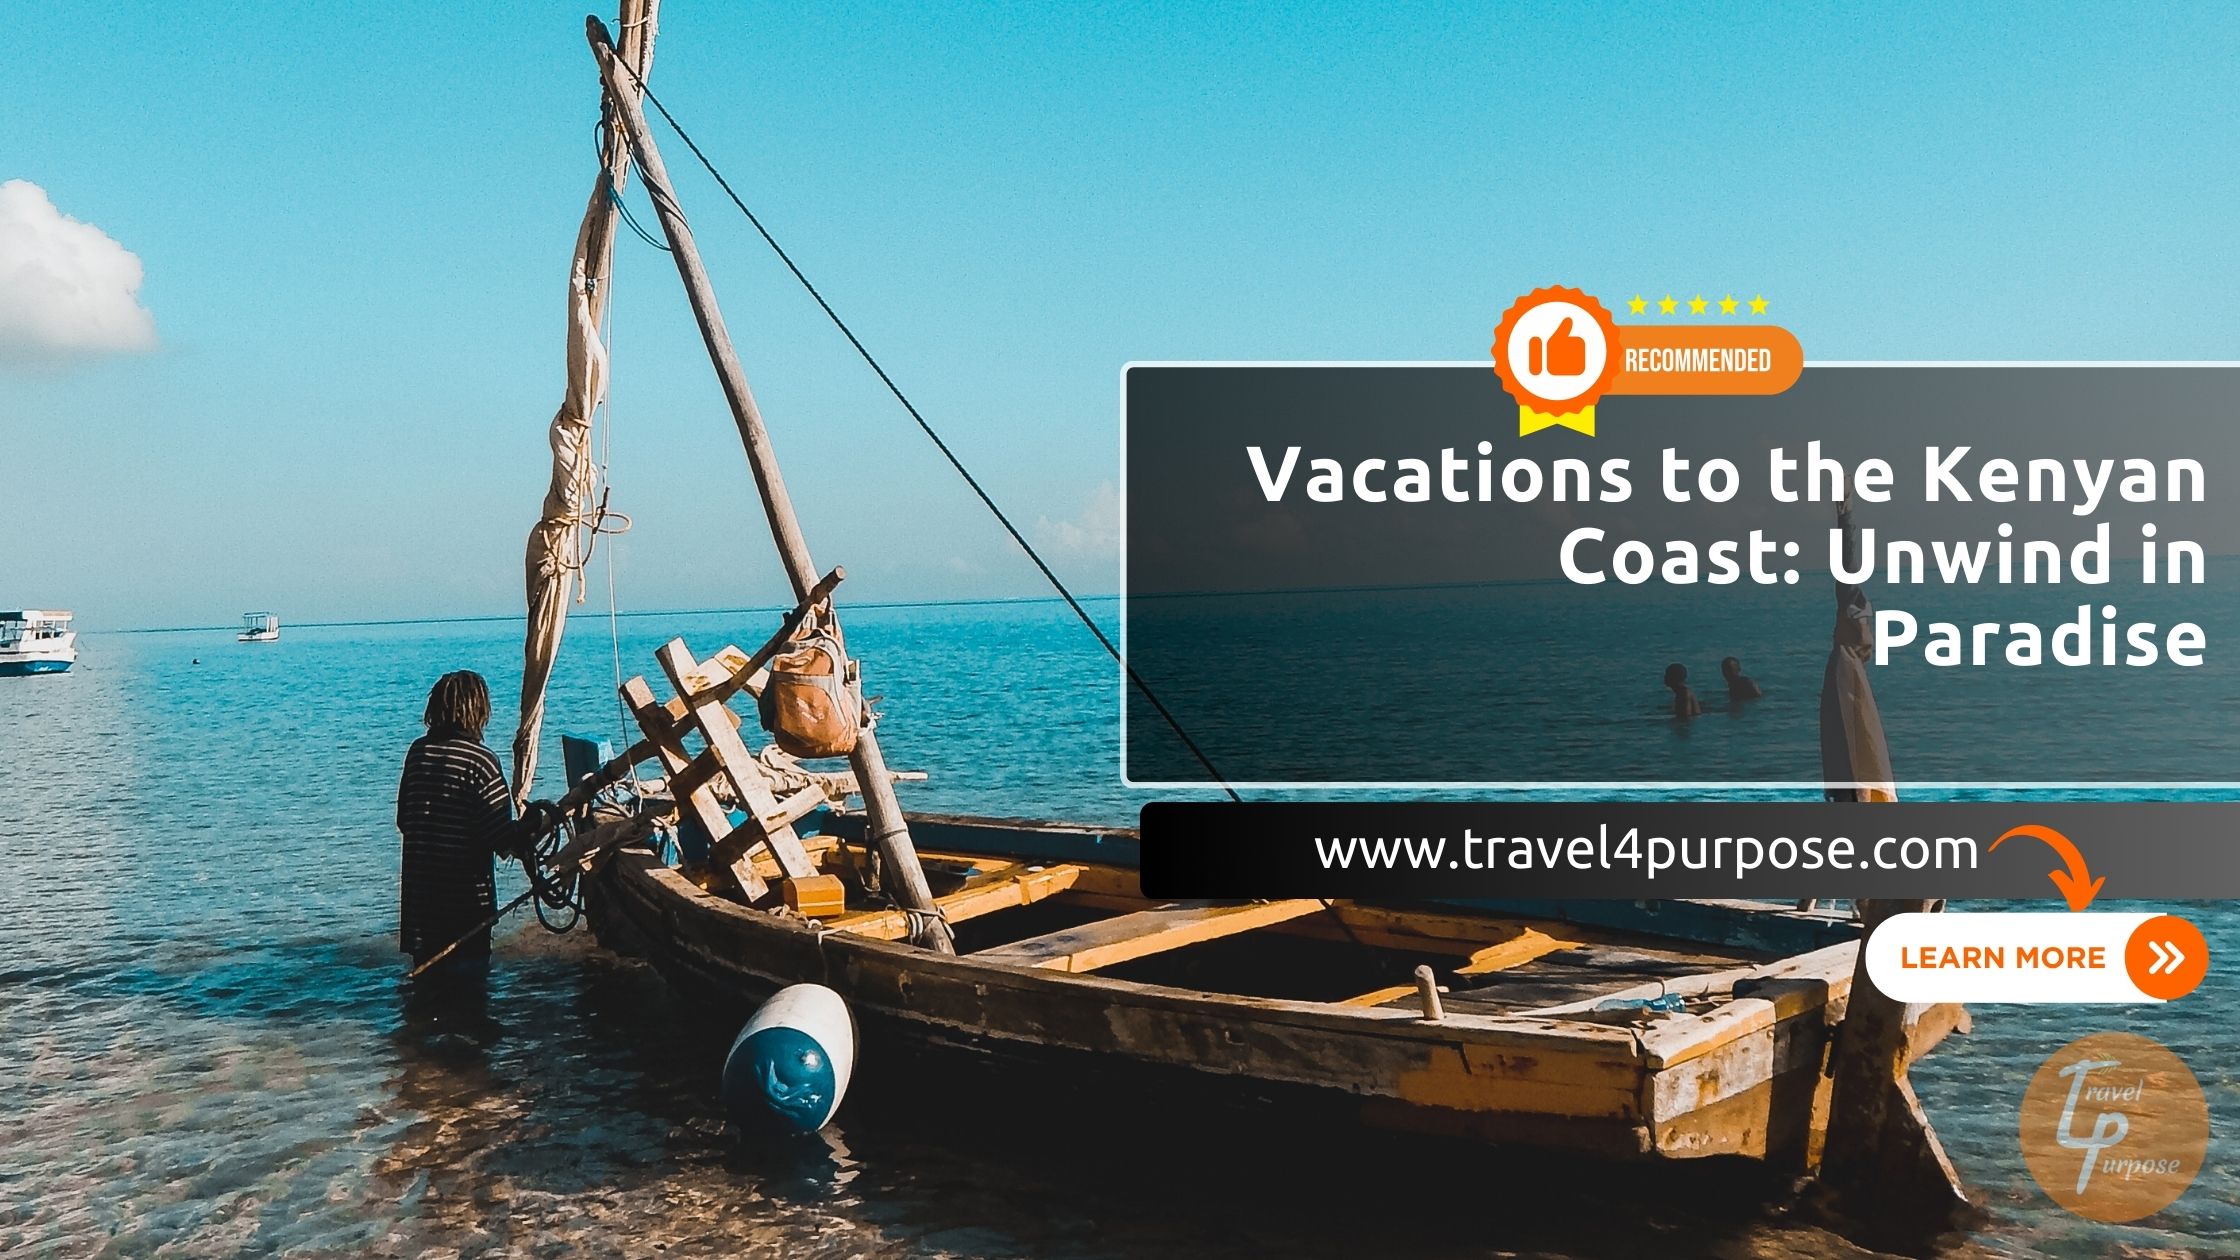 Vacations to the Kenyan Coast Unwind in Paradise - Travel4Purpose Travel Agency Mombasa